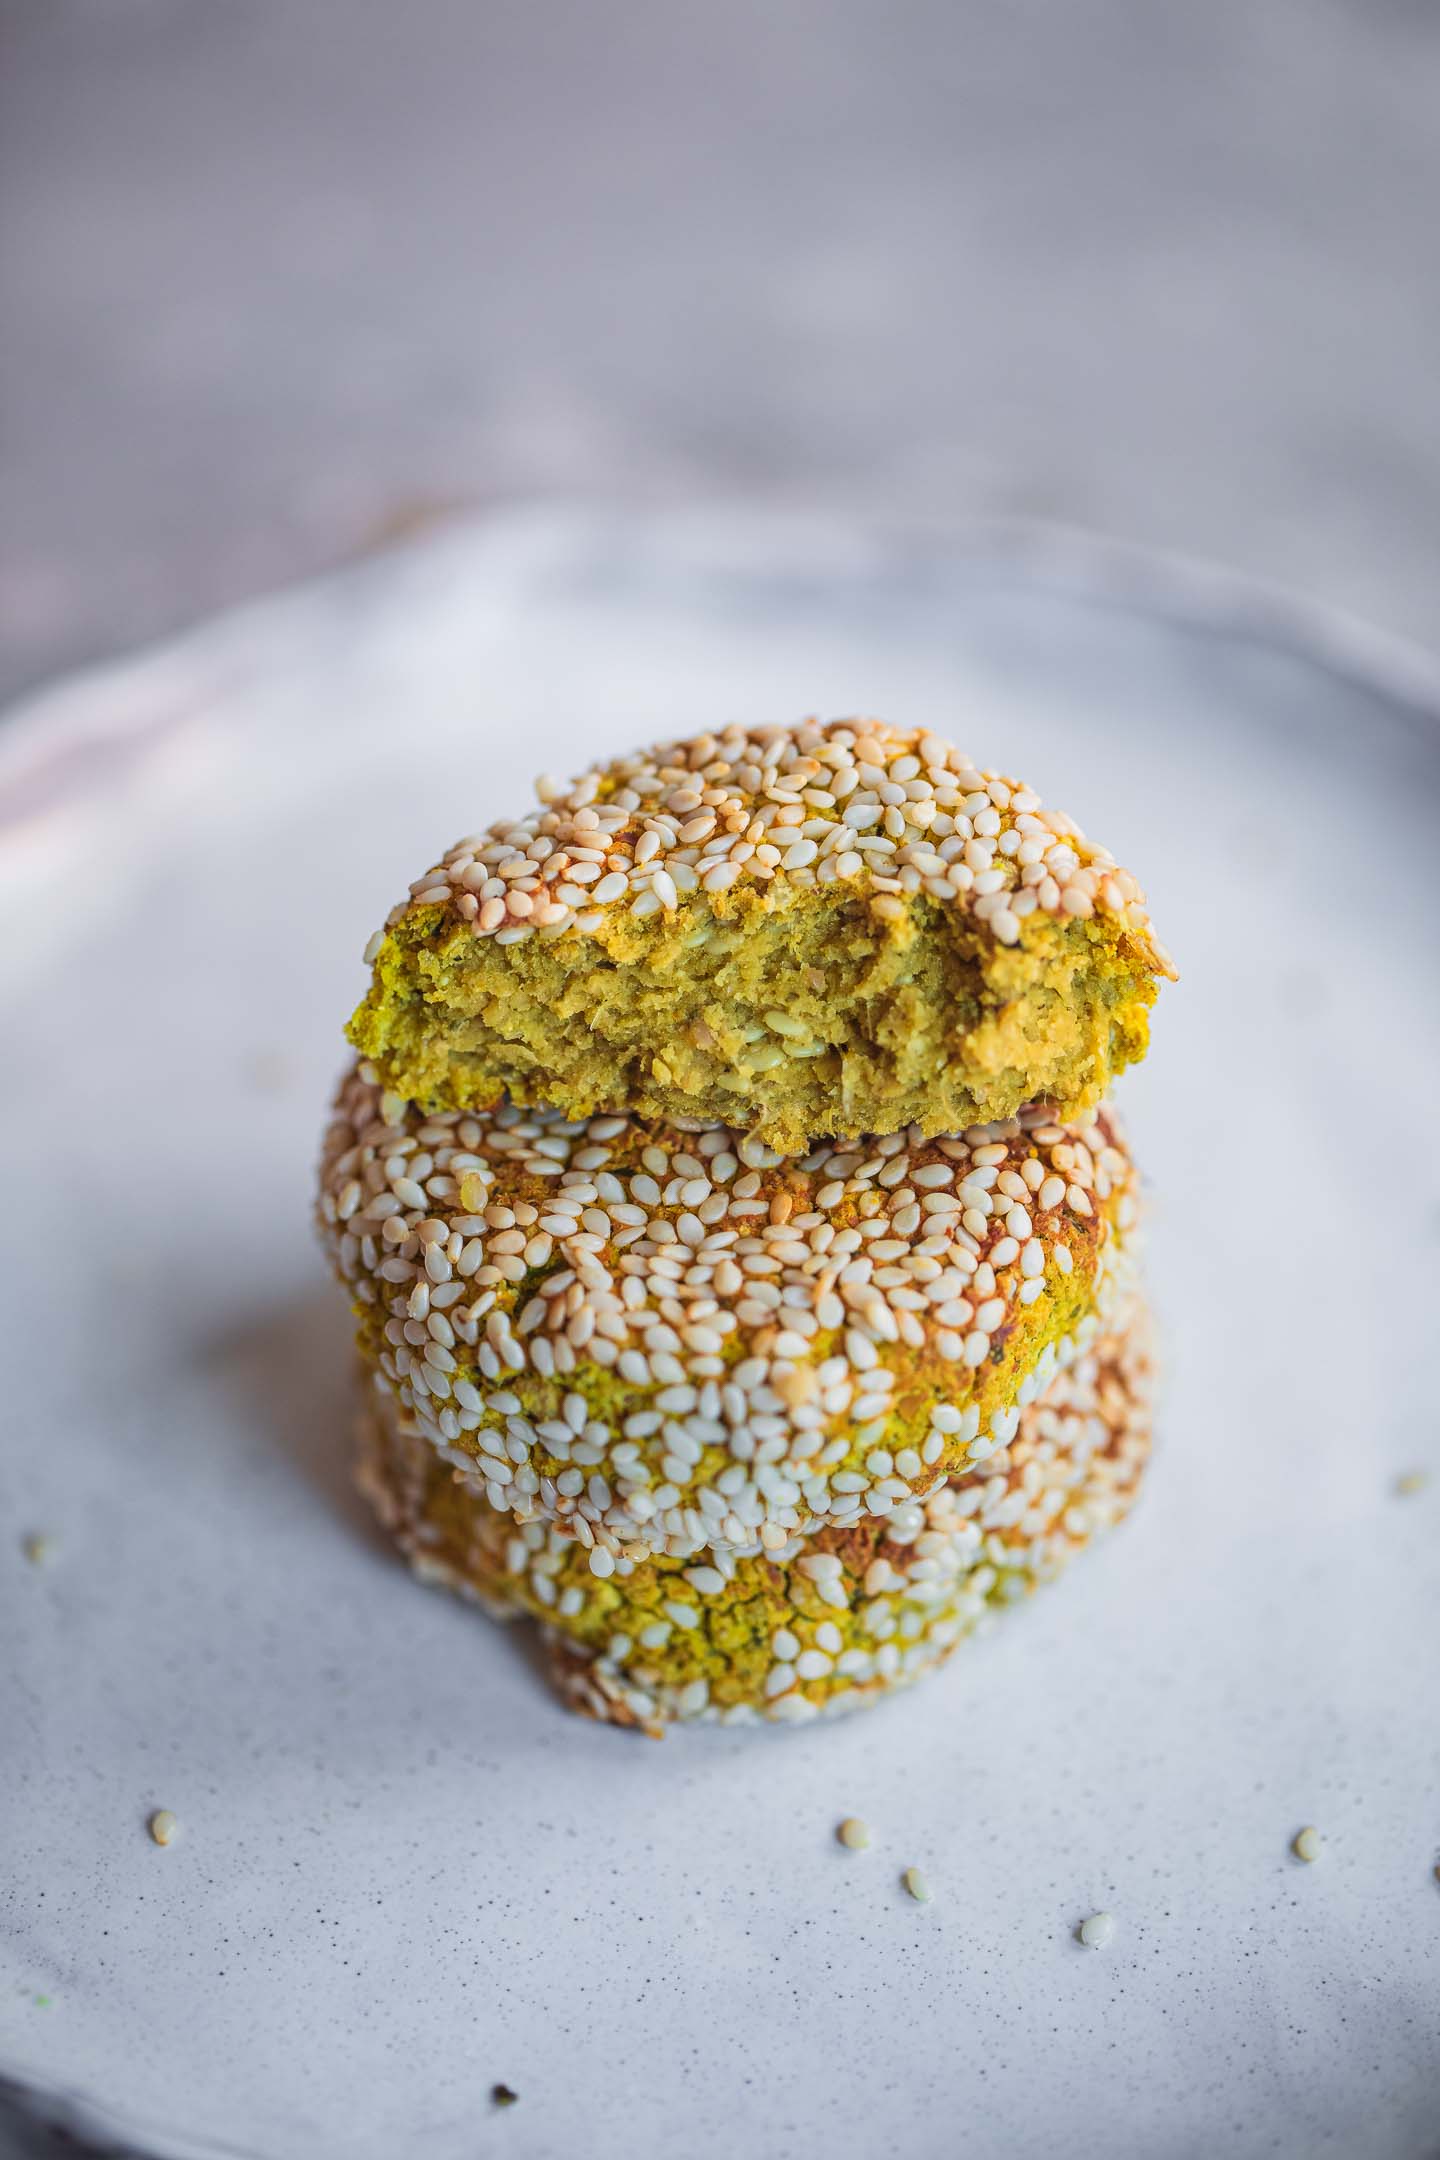 Falafel with sesame seeds on a plate